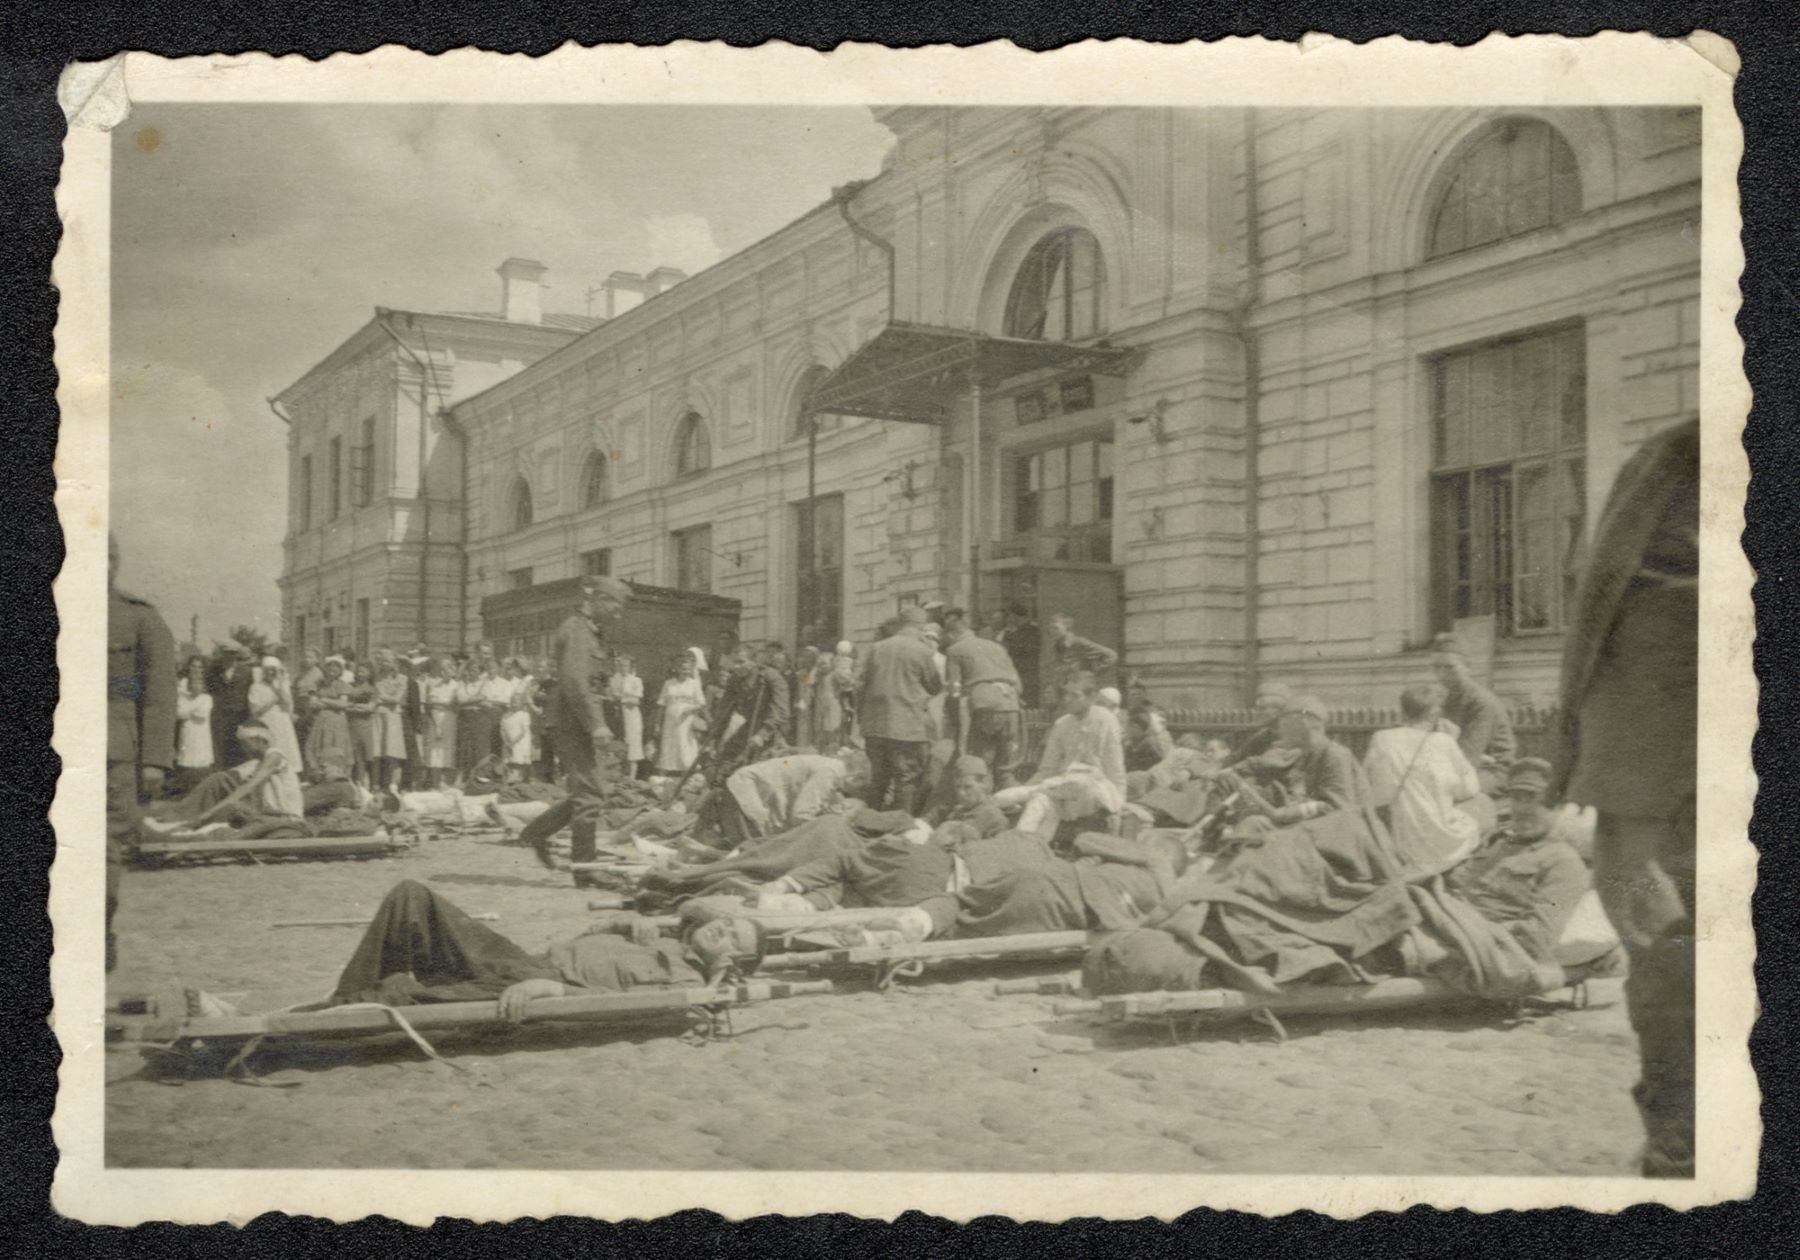 People lying on stretchers in front of the building